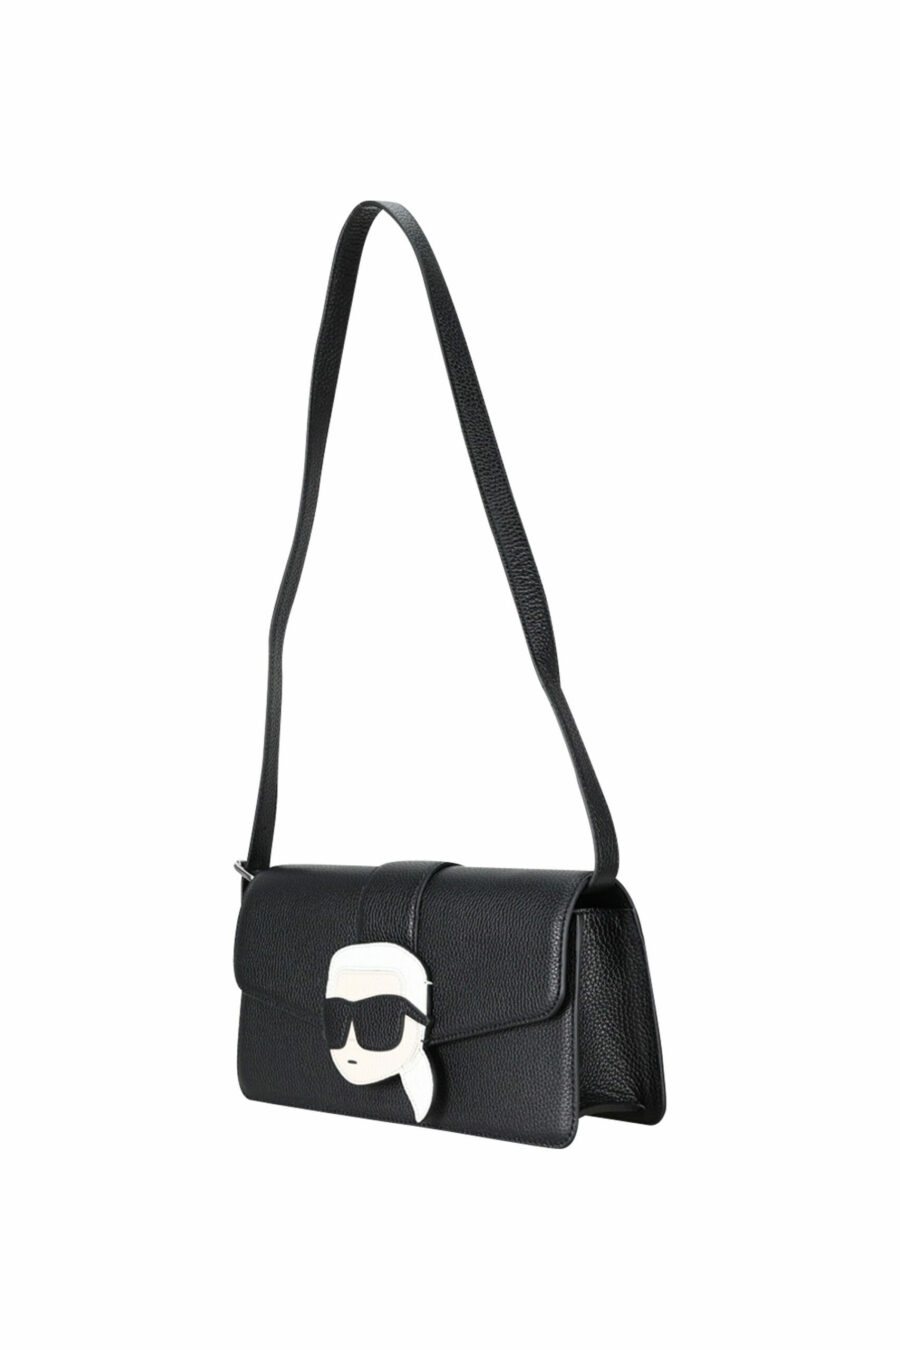 Small shoulder bag with "karl" maxilogo on flap - 8720744416531 1 scaled